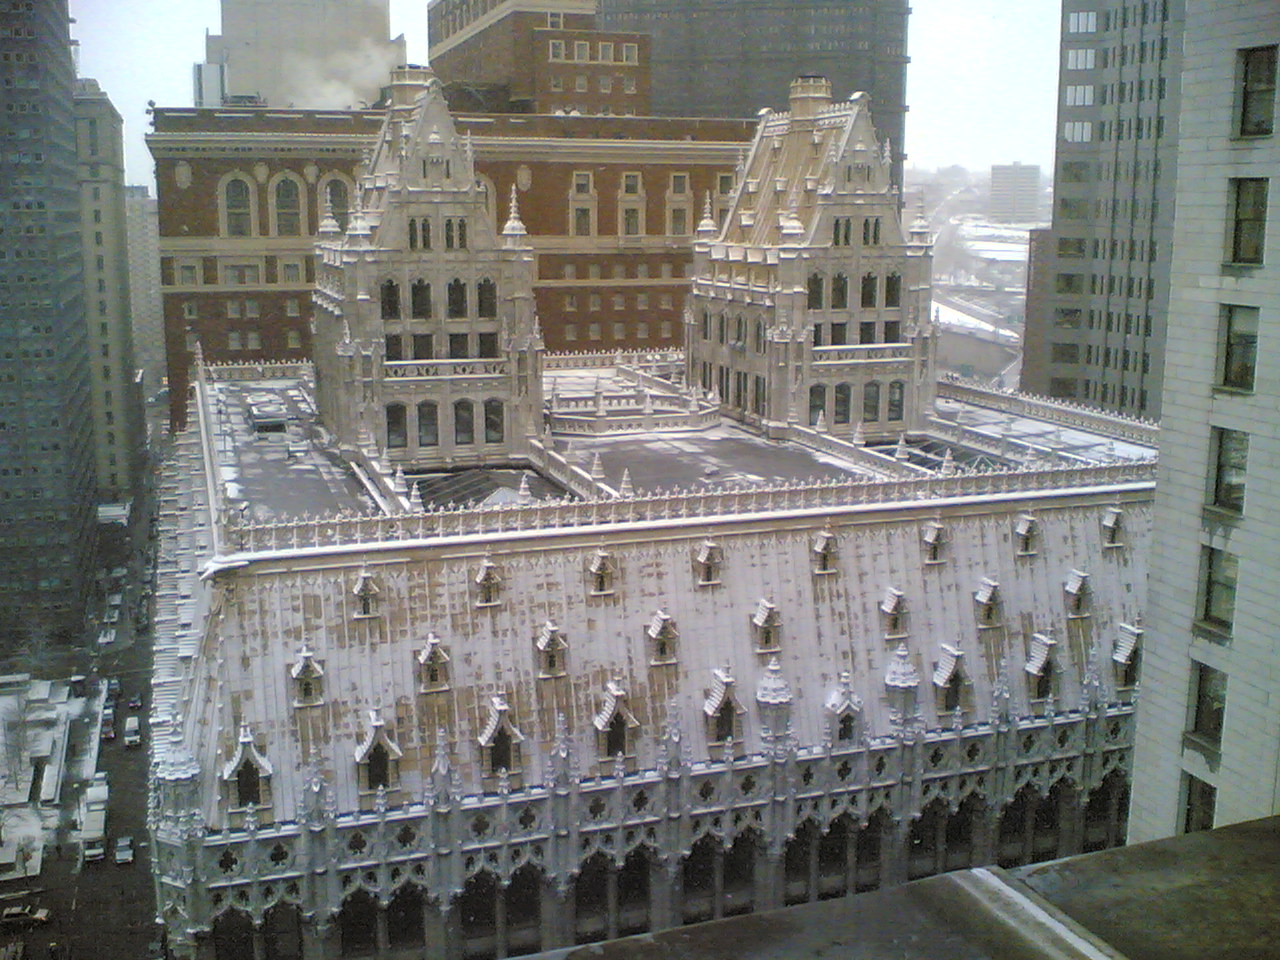 The building's mansard roof with its unique cathedral-like spires.  